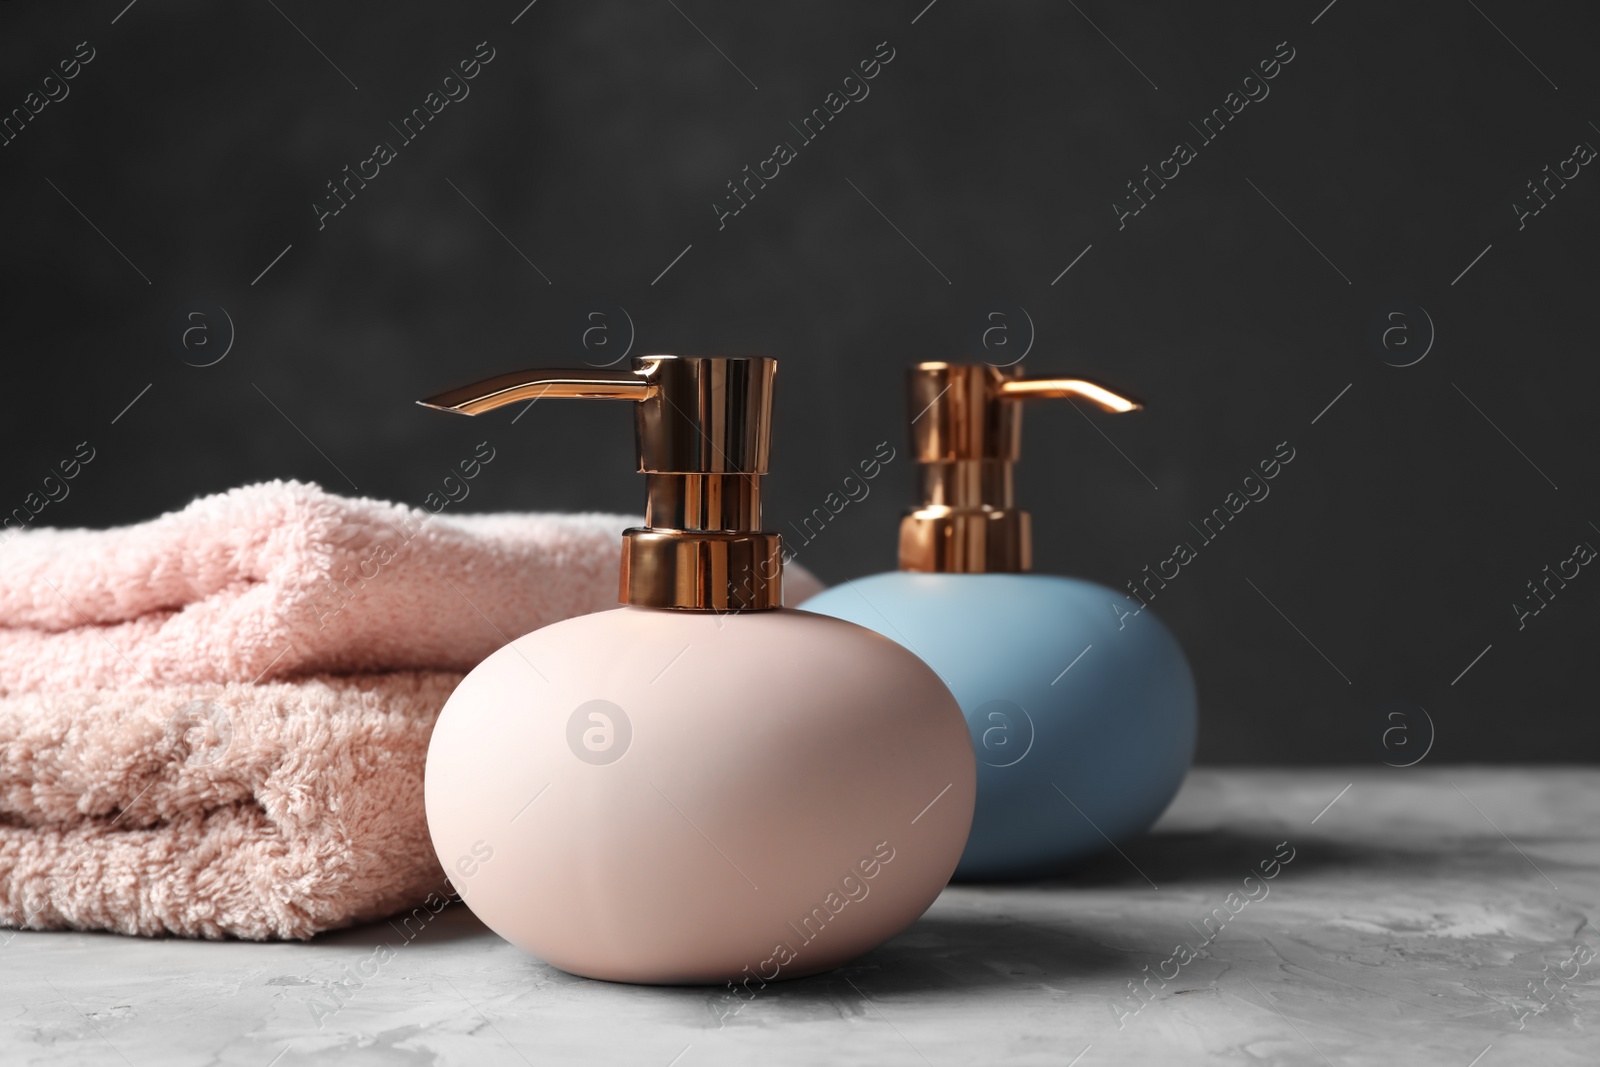 Photo of New stylish soap dispensers and towels on table